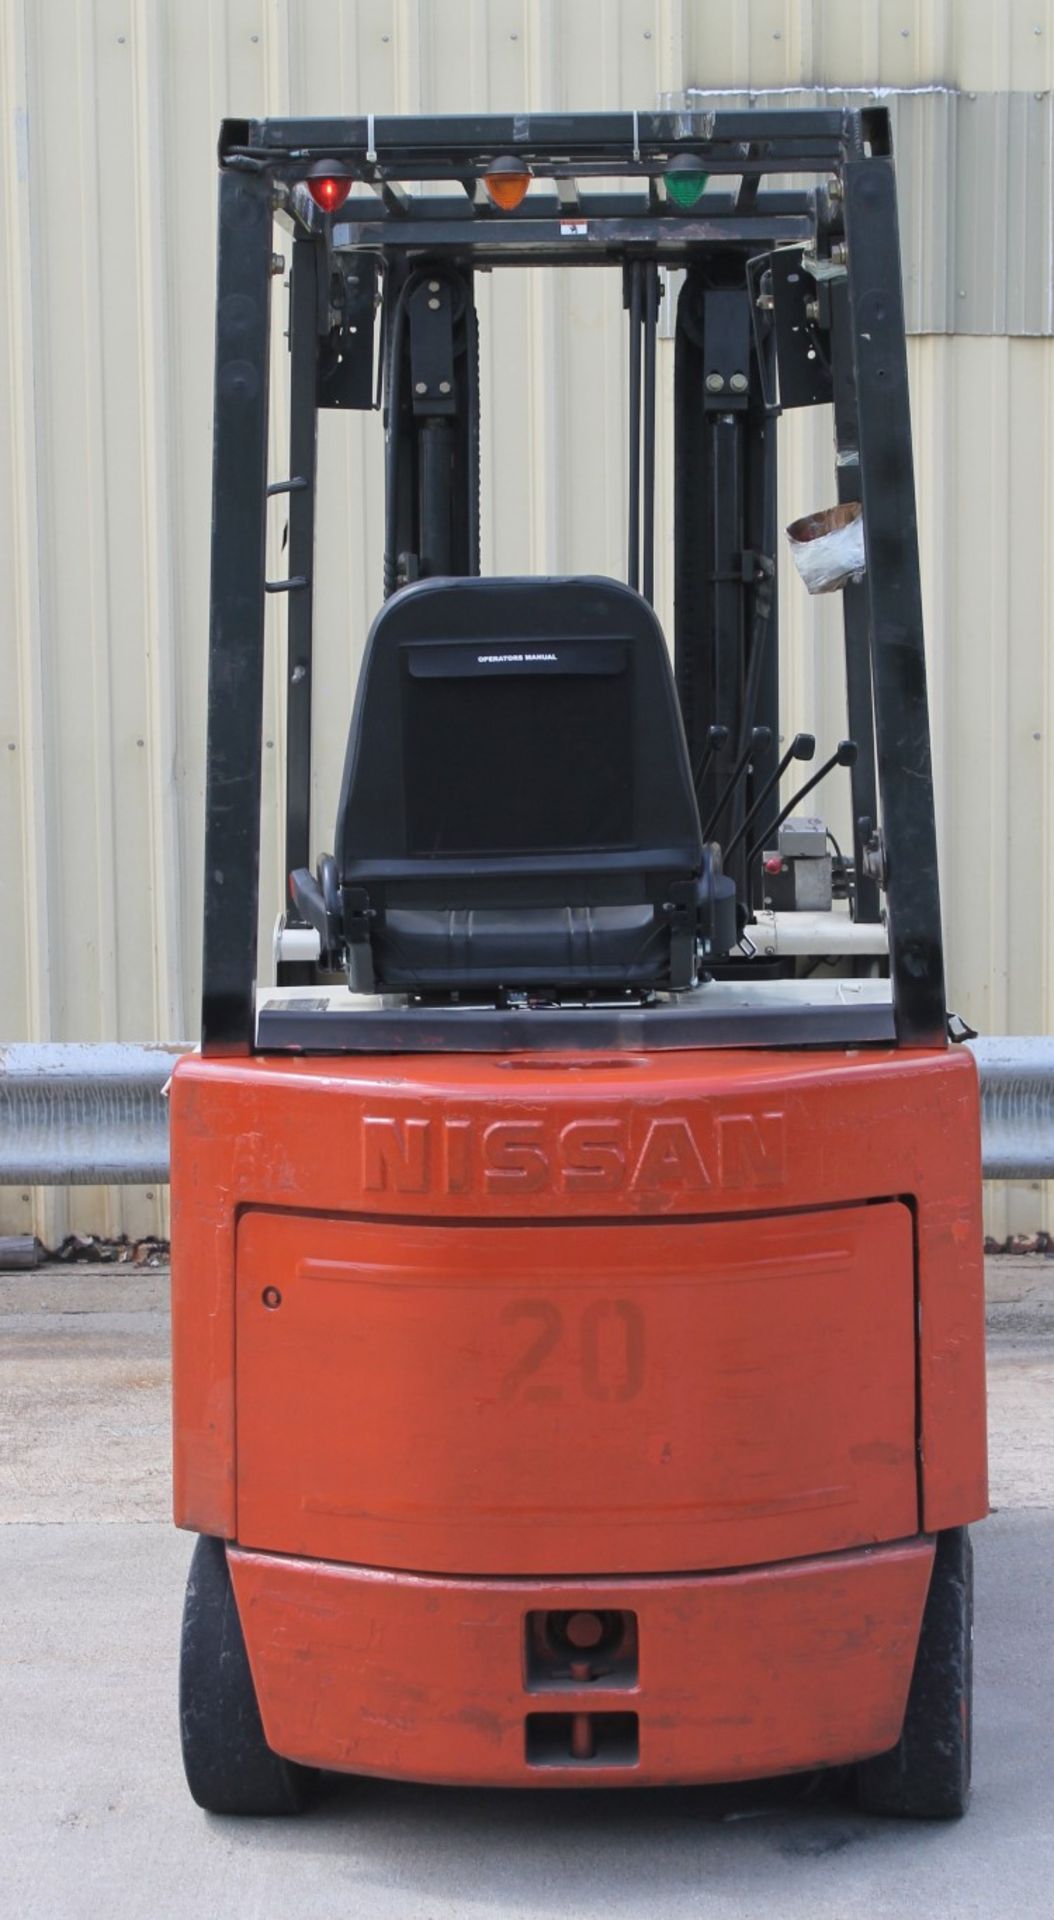 2004 NISSAN 4000 LBS CAPACITY ELECTRIC FORKLIFT WITH 2012 BATTERY, (WATCH VIDEO) - Image 5 of 5